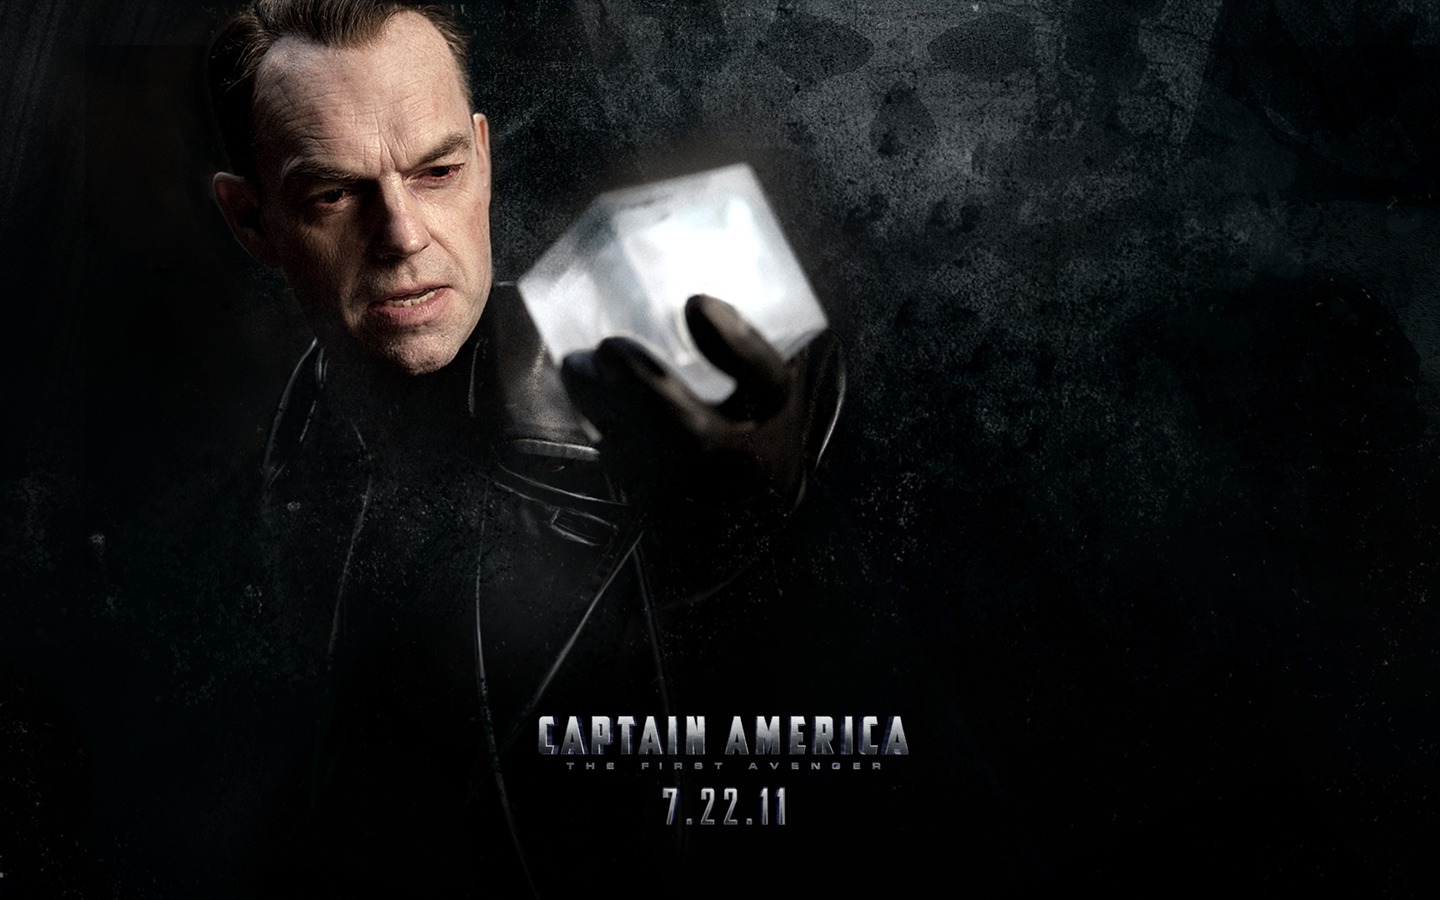 Captain America: The First Avenger wallpapers HD #13 - 1440x900